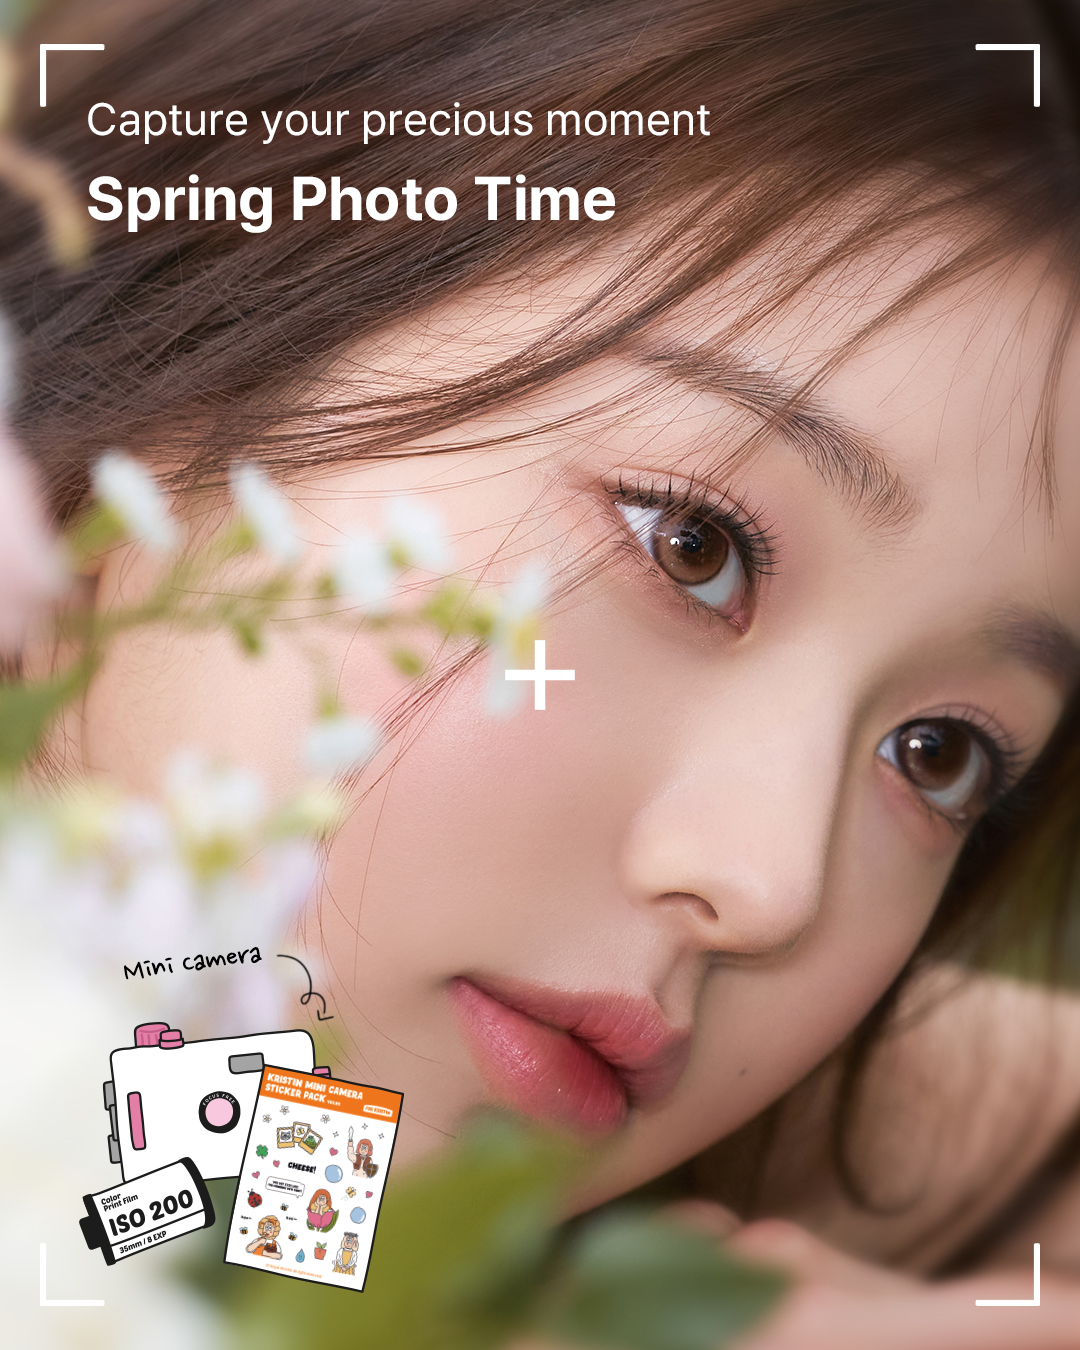 HapaKristin_SEA on X: 𝘋𝘦𝘸𝘺 𝘒𝘳𝘪𝘴𝘵𝘪𝘯 𝘸𝘪𝘵𝘩 𝘑𝘢𝘯𝘨 𝘞𝘰𝘯  𝘠𝘰𝘶𝘯𝘨 Flower in the springtime🧚‍♀️ Purchase 5 or more contacts, FREE  Kristin Mini Camera 📸 👉 #IVE #Youthfullens  #Yo